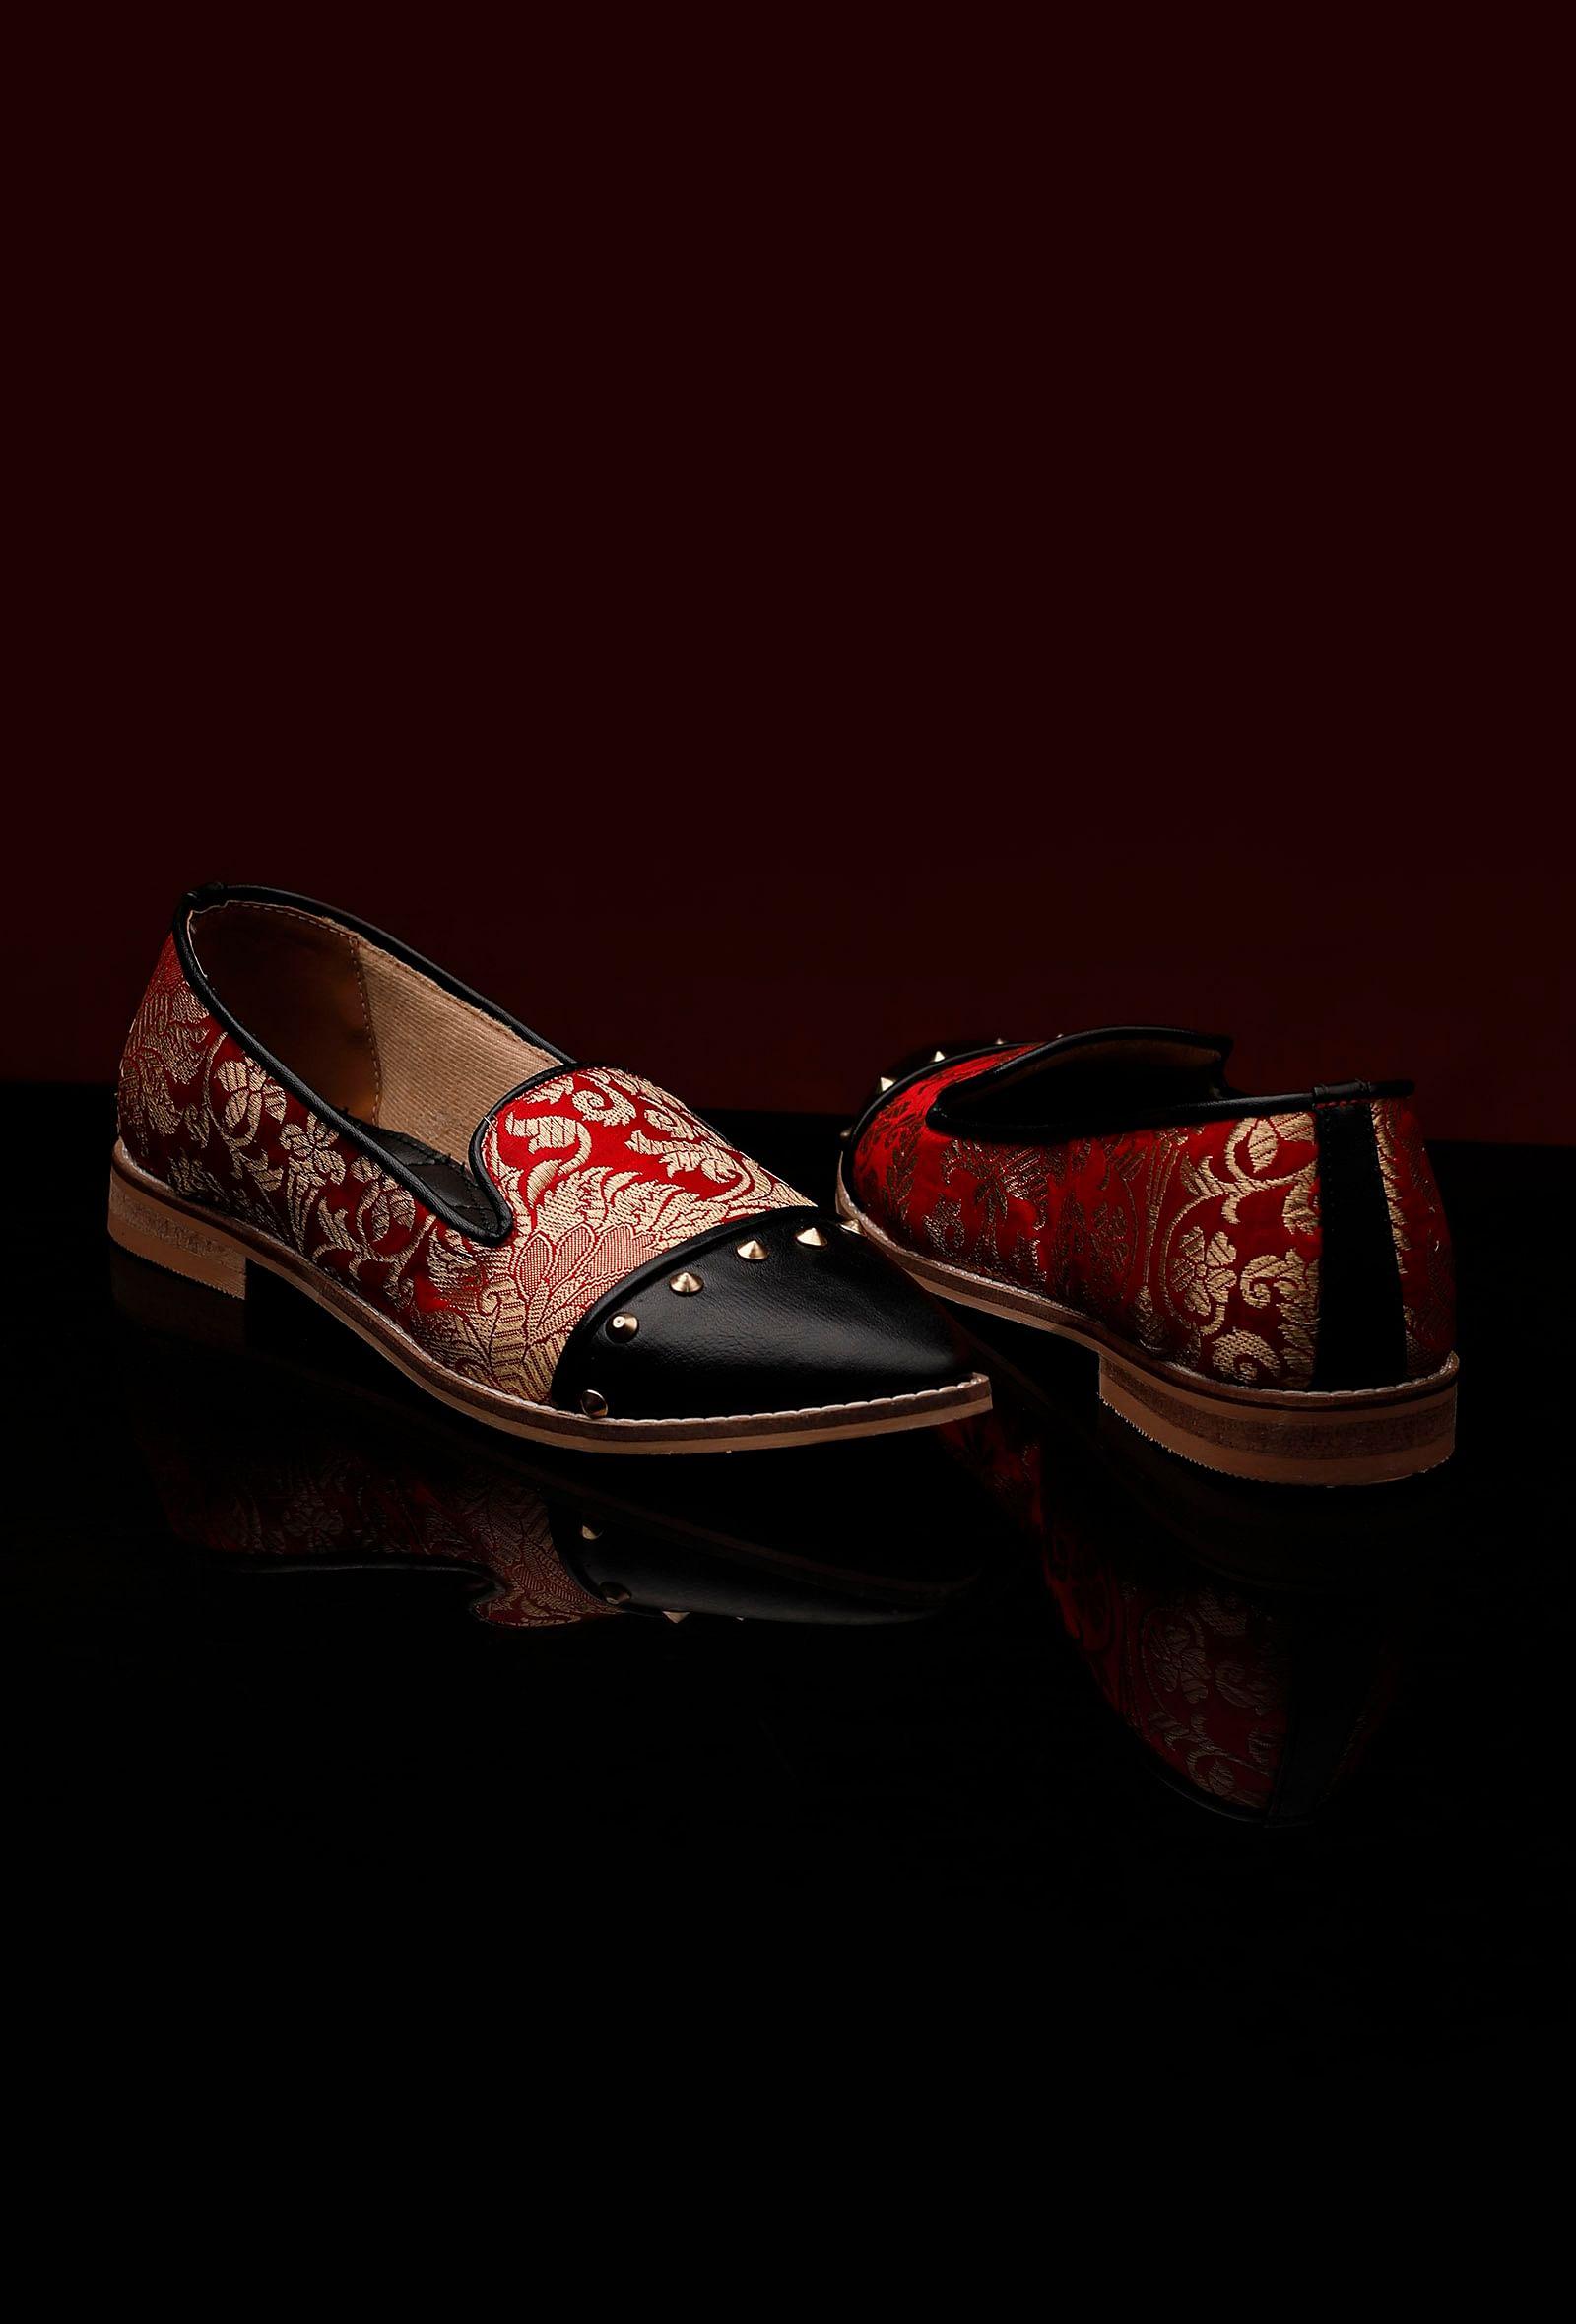 black-with-red-brocade-loafers